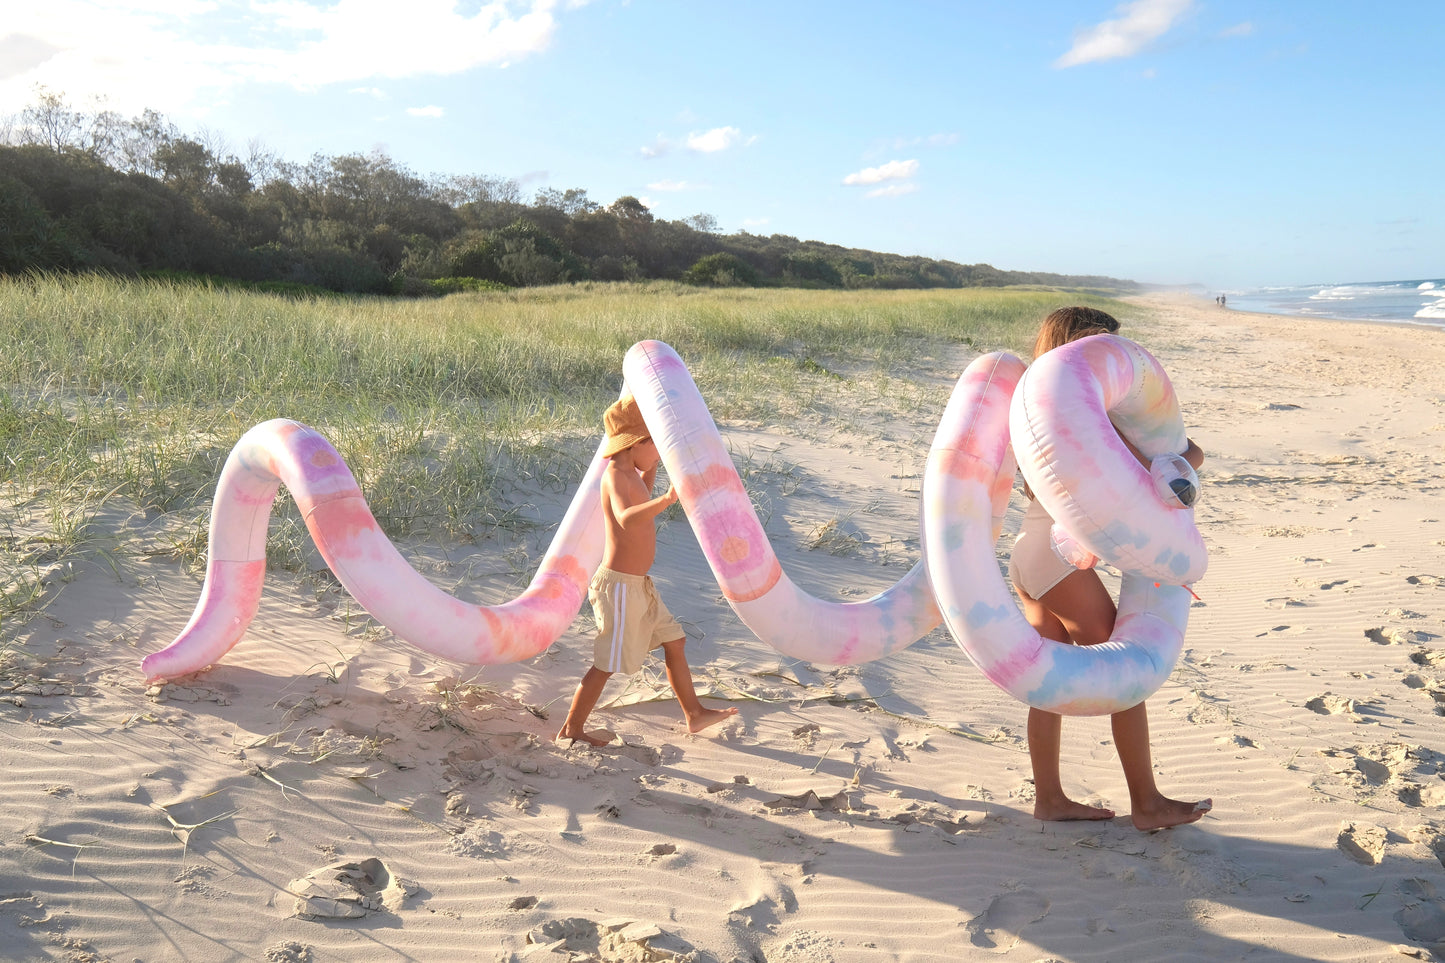 Giant Inflatable Noodle Snake